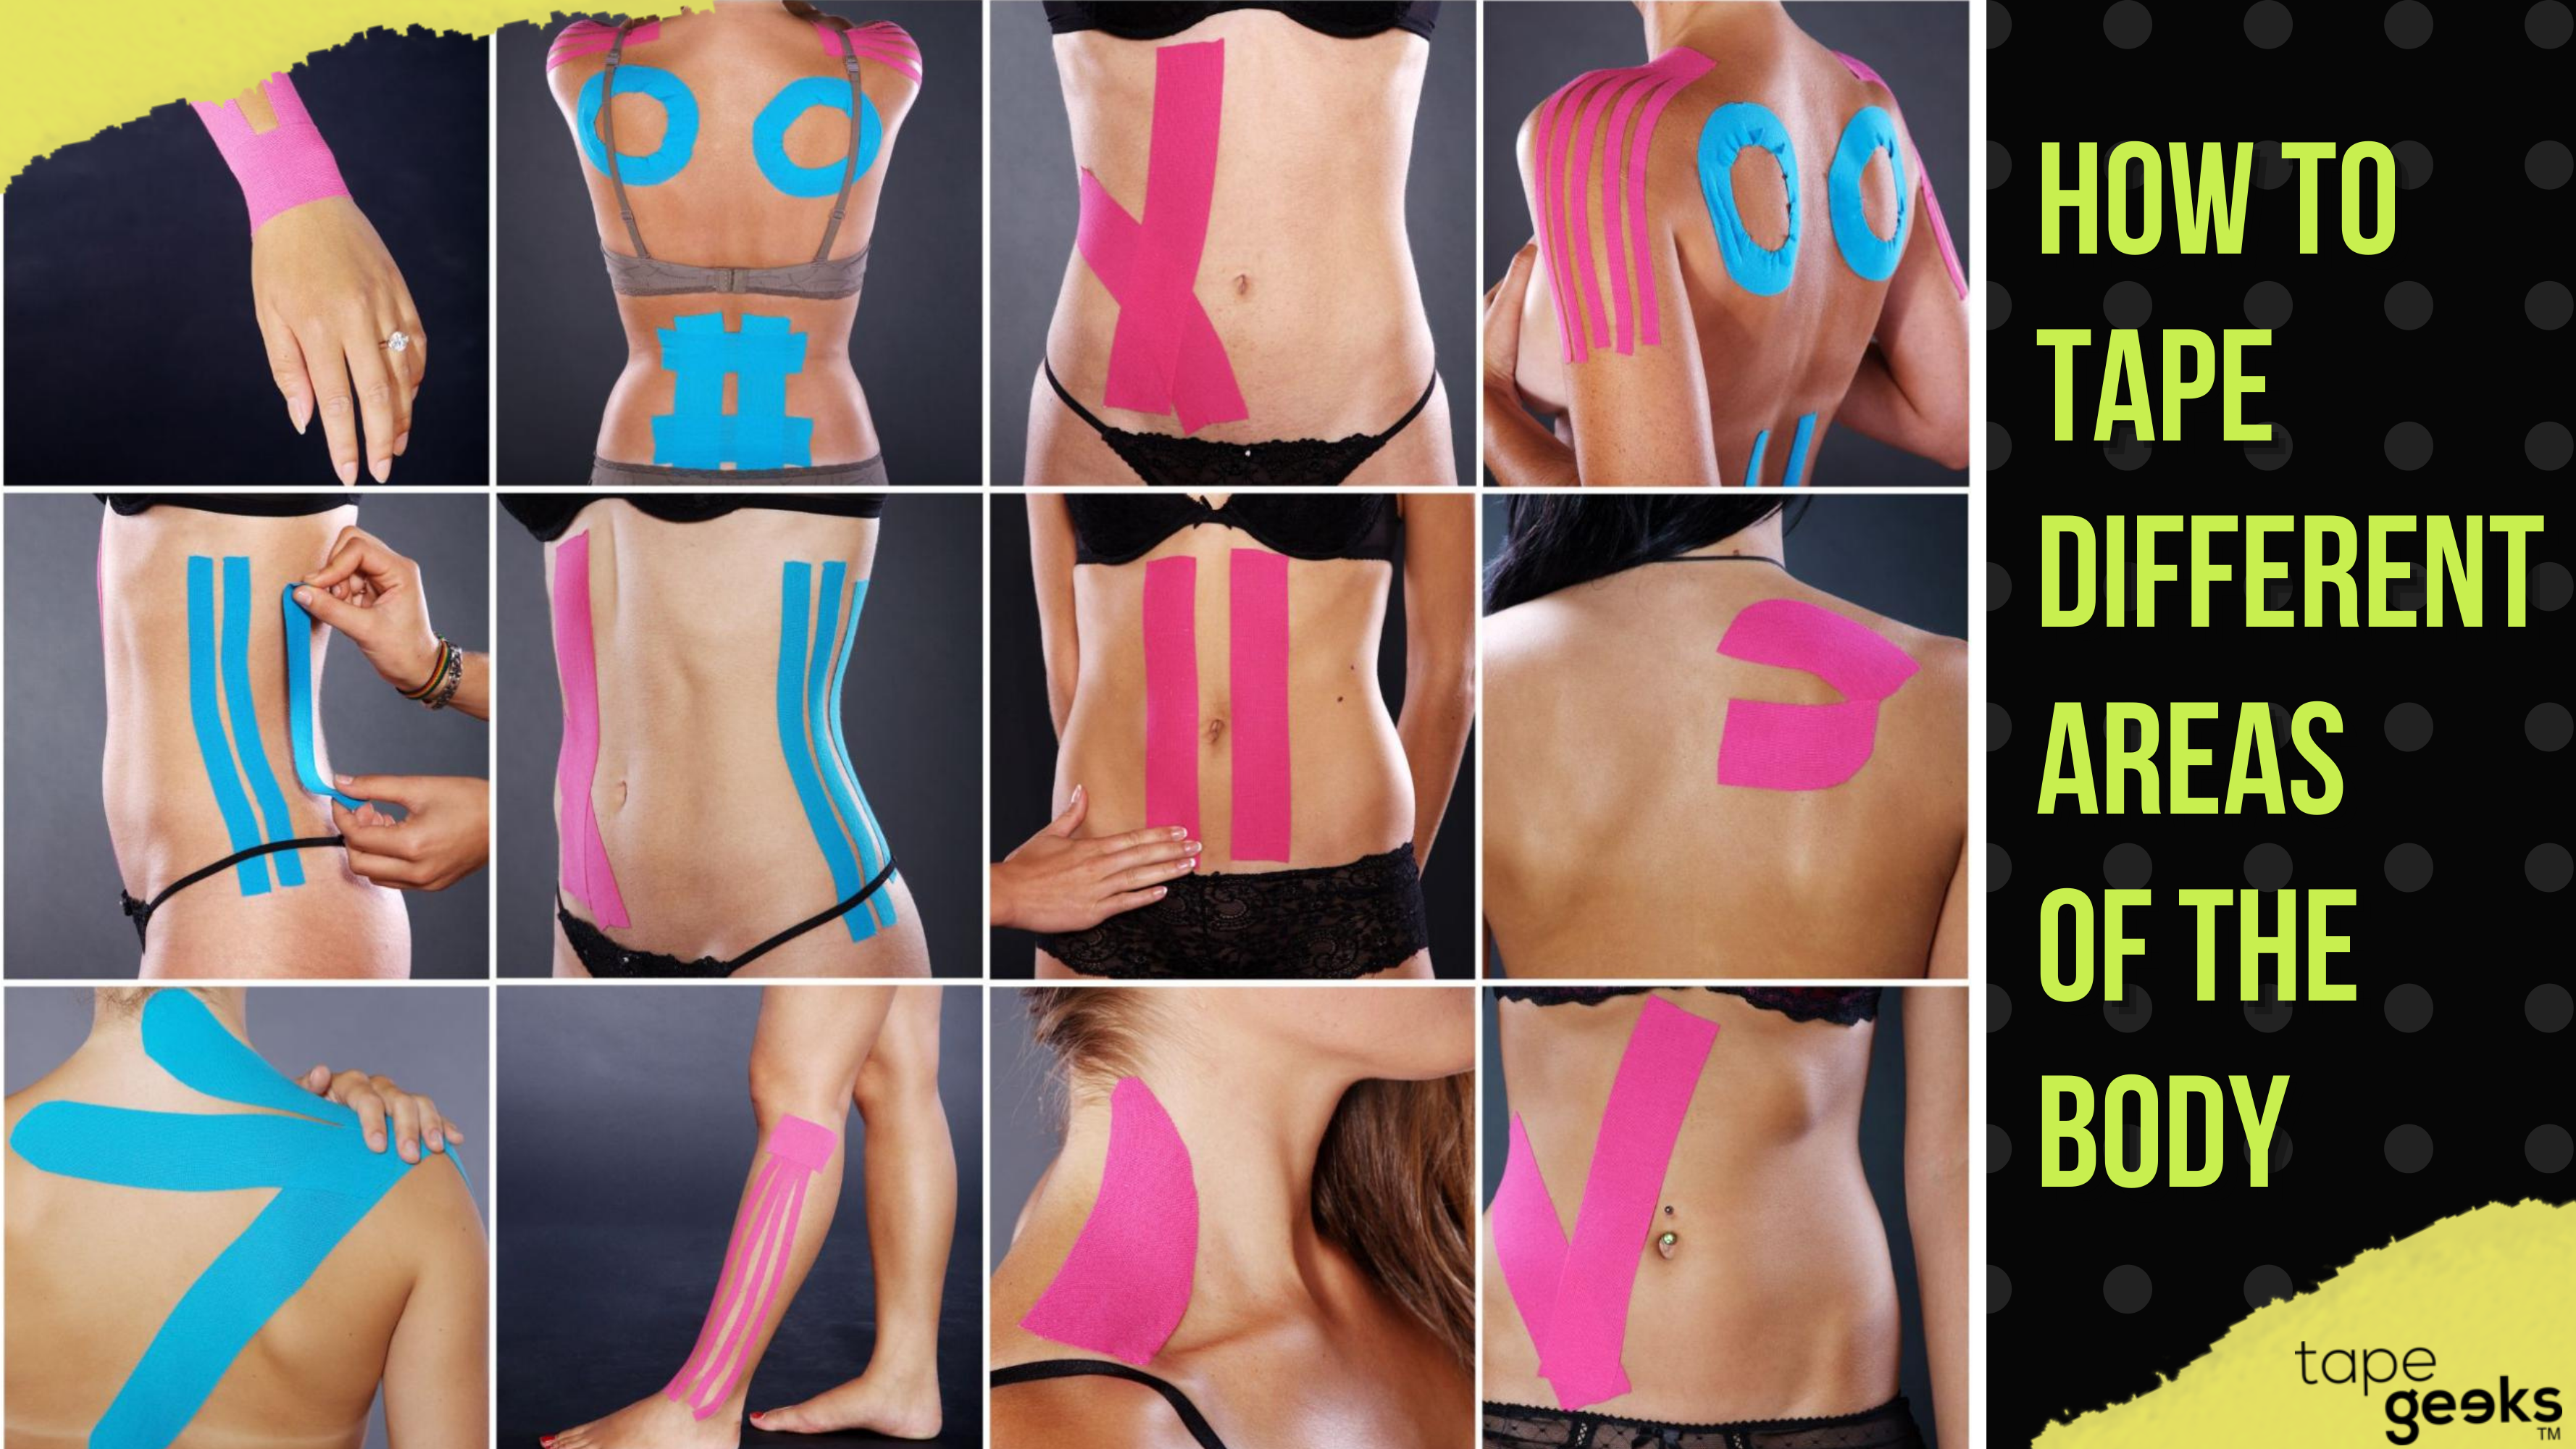 How to apply kinesiology tape for the IT band or lateral hip - TapeGeeks